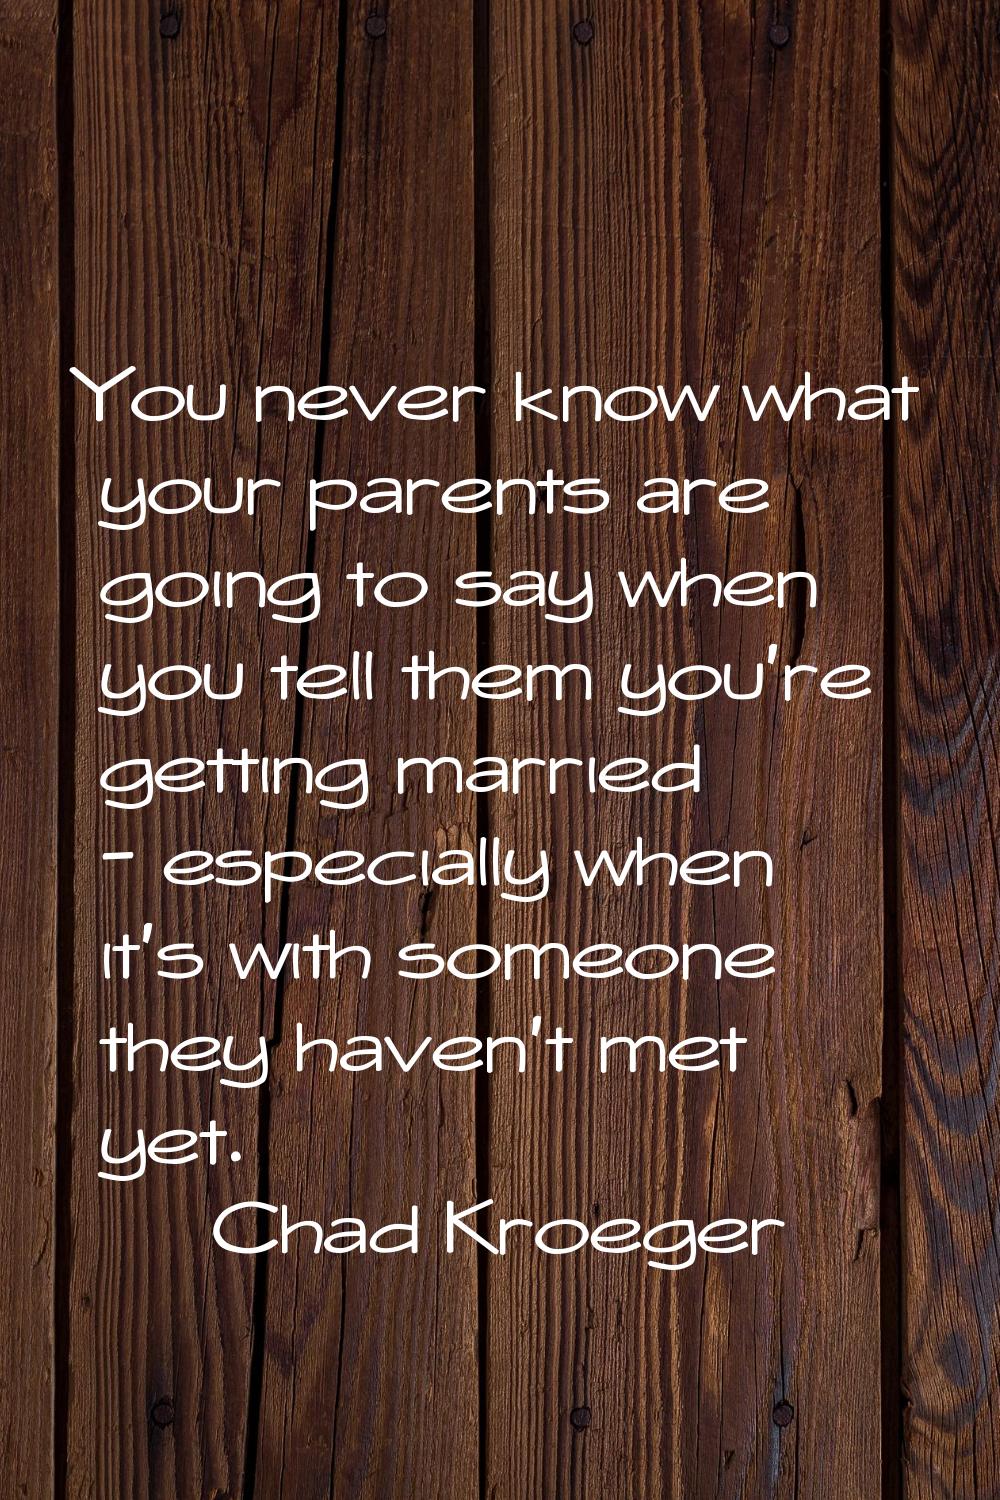 You never know what your parents are going to say when you tell them you're getting married - espec